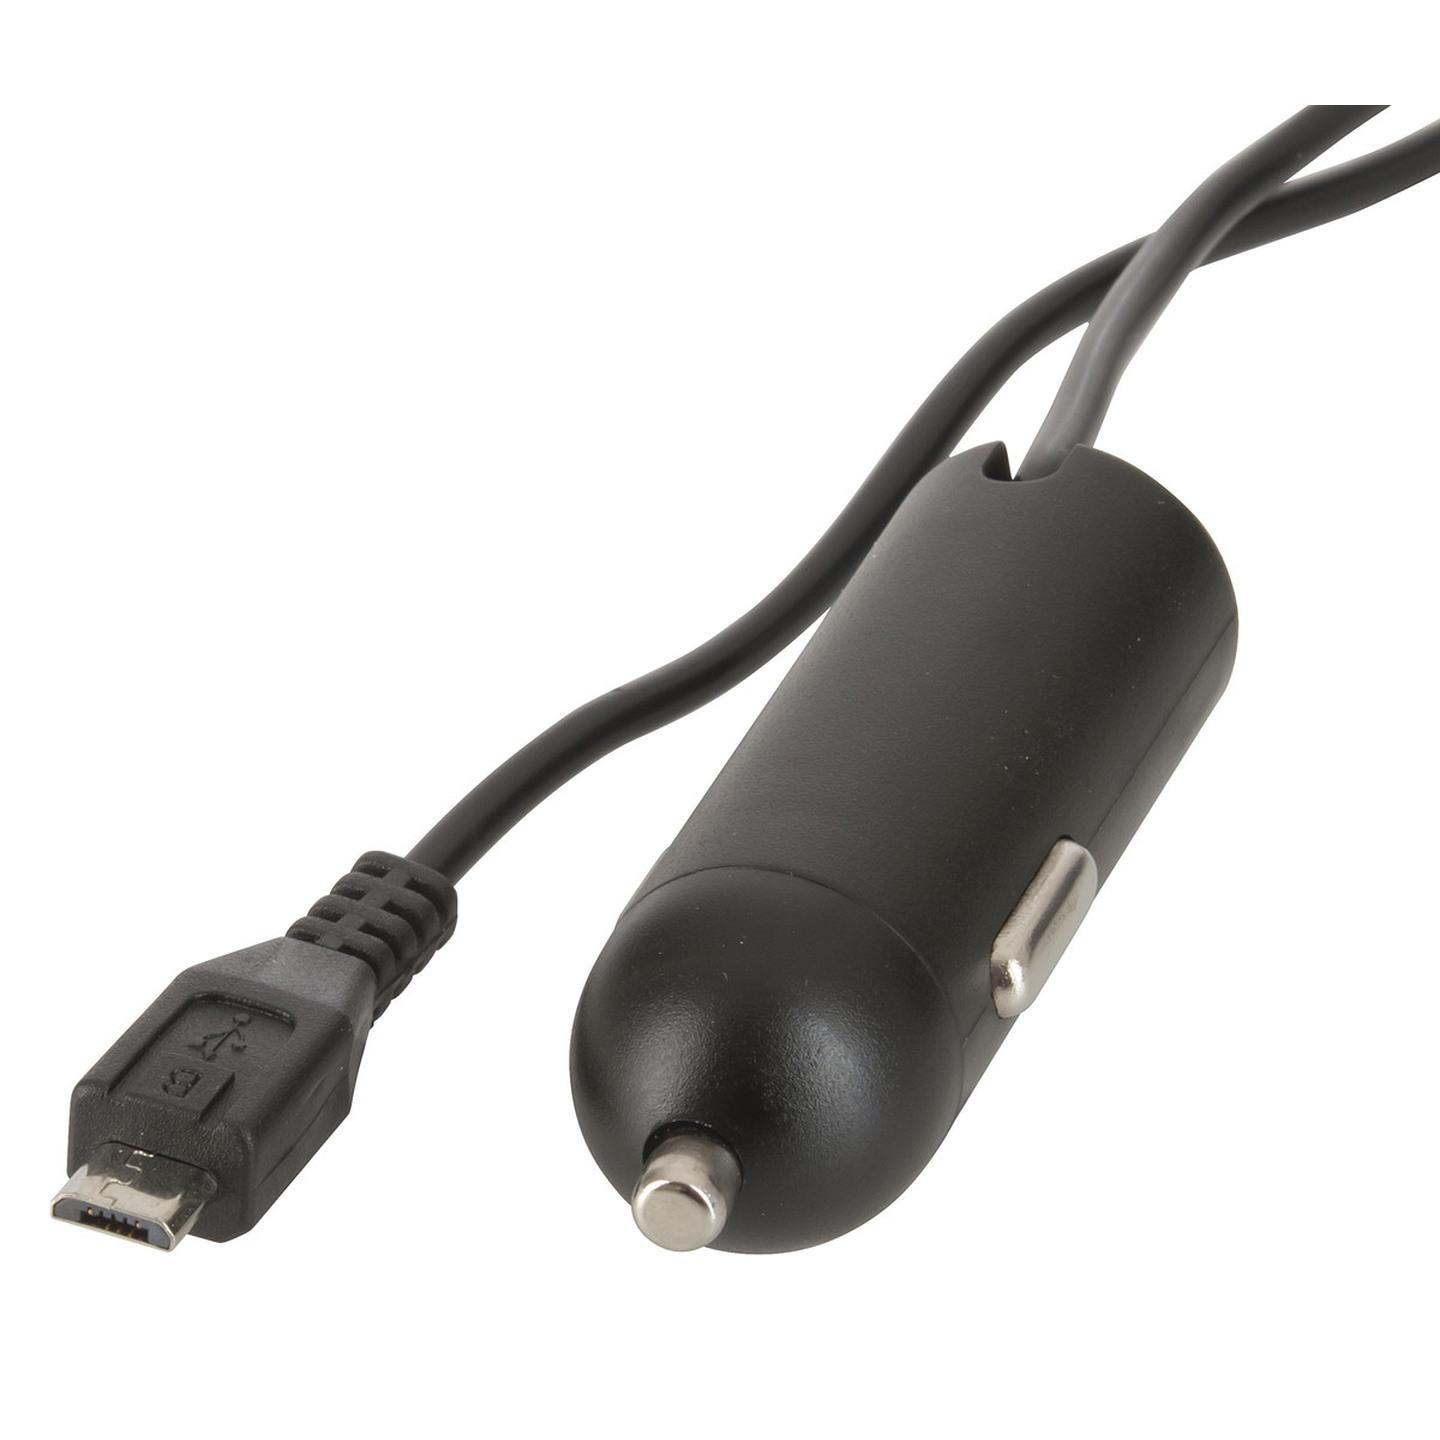 In-Car Quick Charger for Smart Phones and Tablets Micro-B